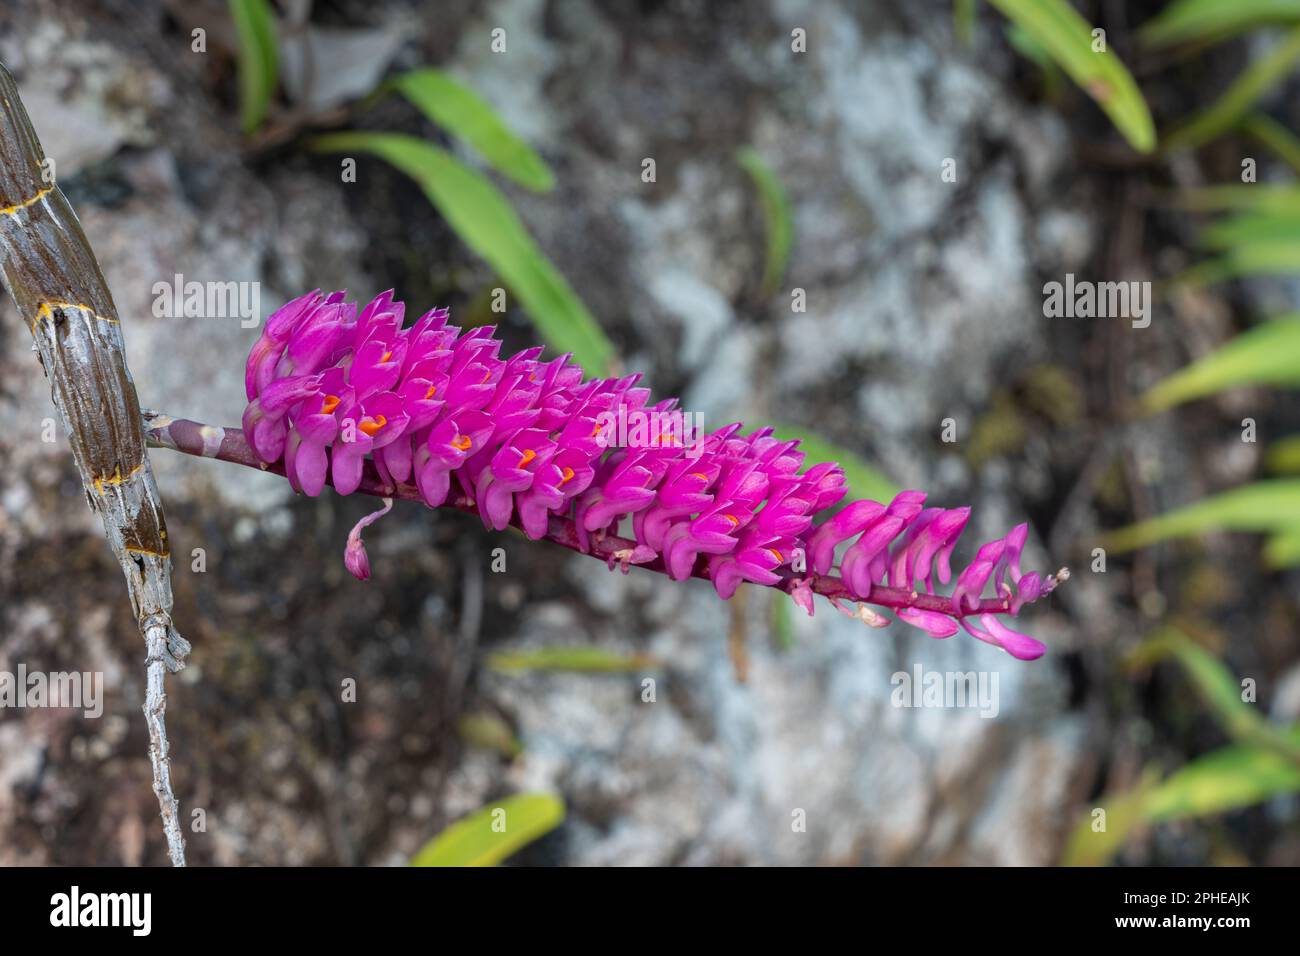 Closeup view of bright pink and orange flowers of wild tropical epiphytic orchid species dendrobium secundum aka toothbrush orchid blooming on rock Stock Photo